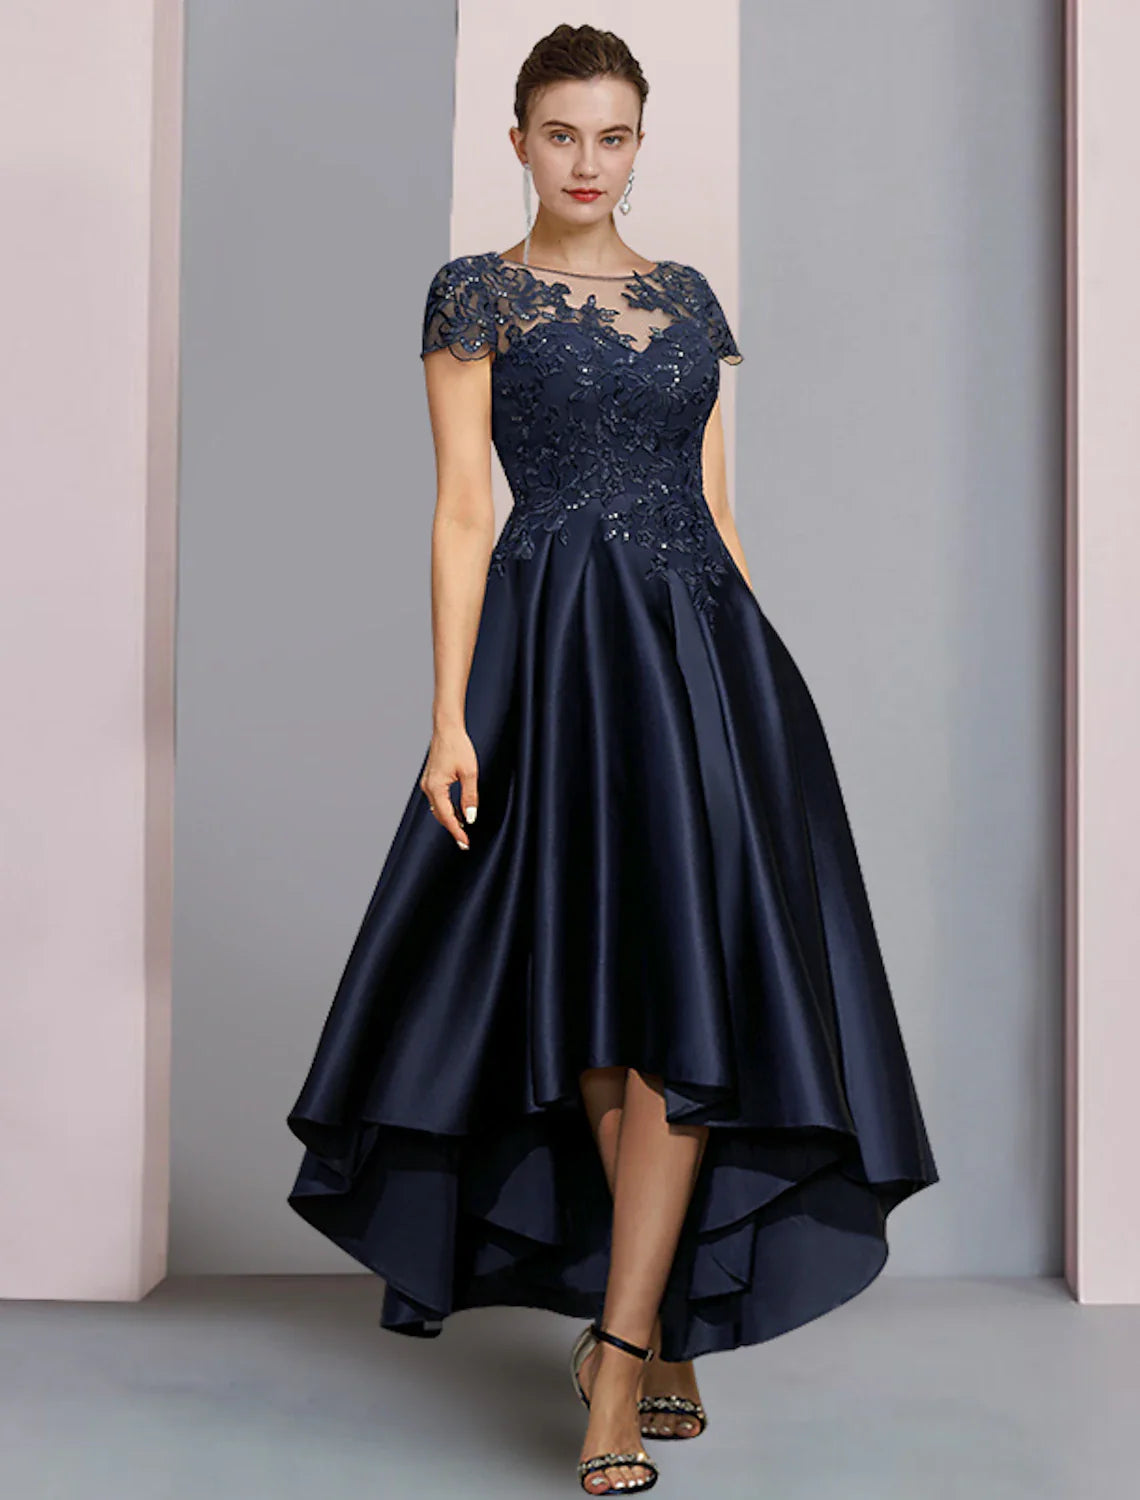 A-Line Mother of the Bride Dress Formal Wedding Guest Party Elegant High Low Scoop Neck Asymmetrical Tea Length Satin Lace Half Sleeve with Sequin Appliques